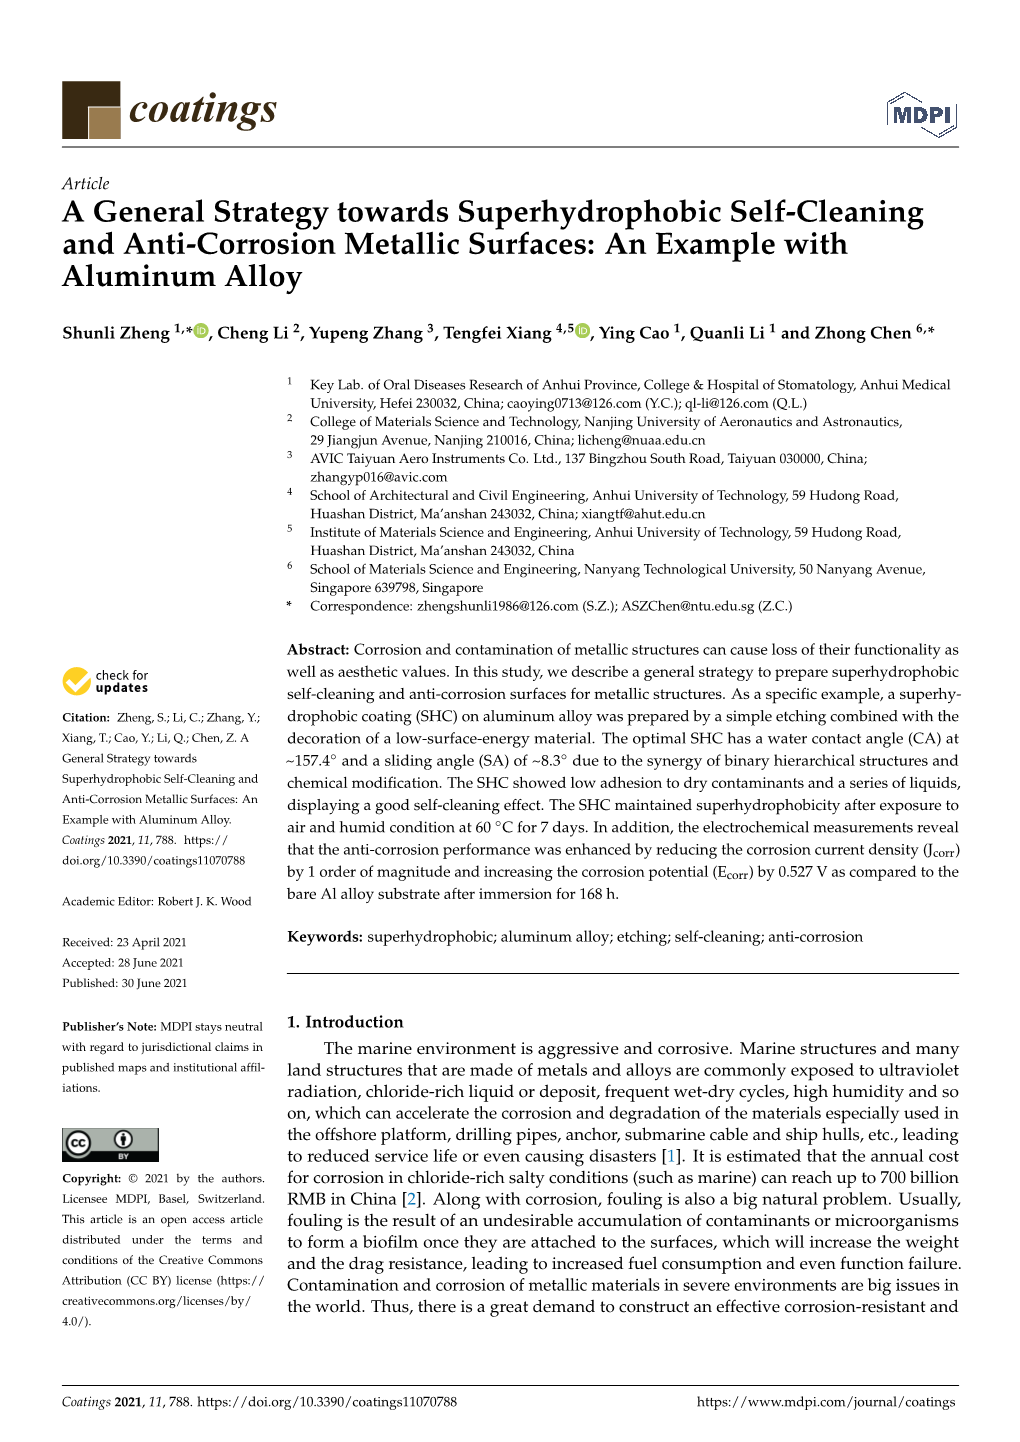 A General Strategy Towards Superhydrophobic Self-Cleaning and Anti-Corrosion Metallic Surfaces: an Example with Aluminum Alloy